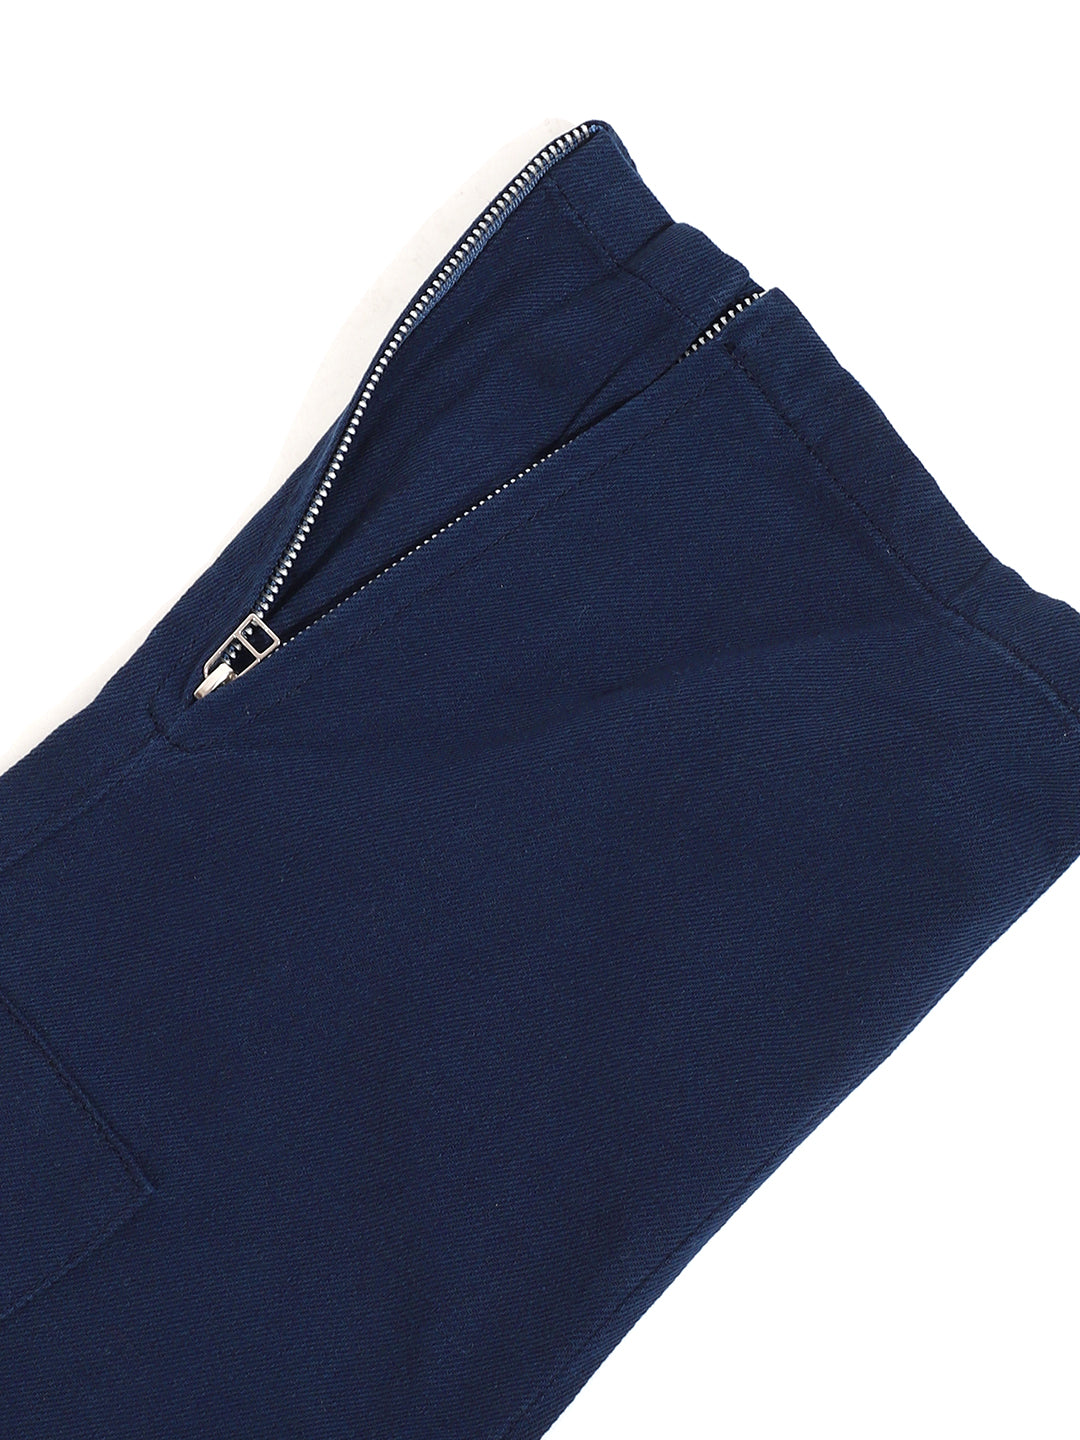 Navy Cotton Drill 8 pocket Baggy Fit Cargo